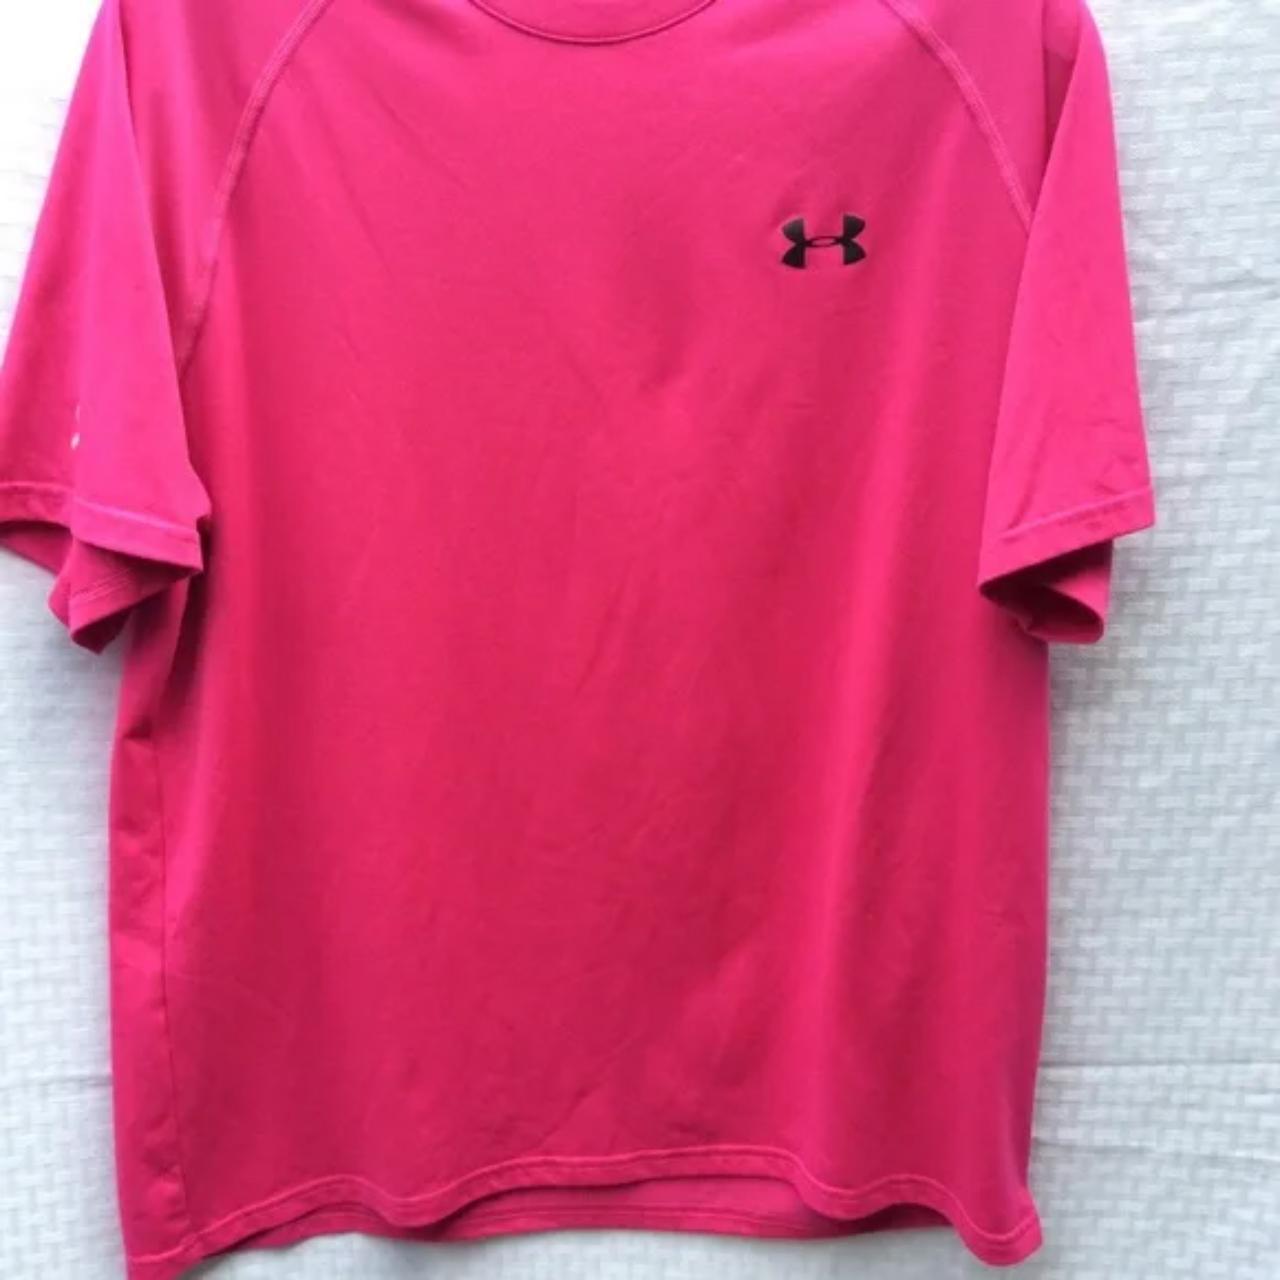 Under Armour Breathable and Stretchable Shirt Size